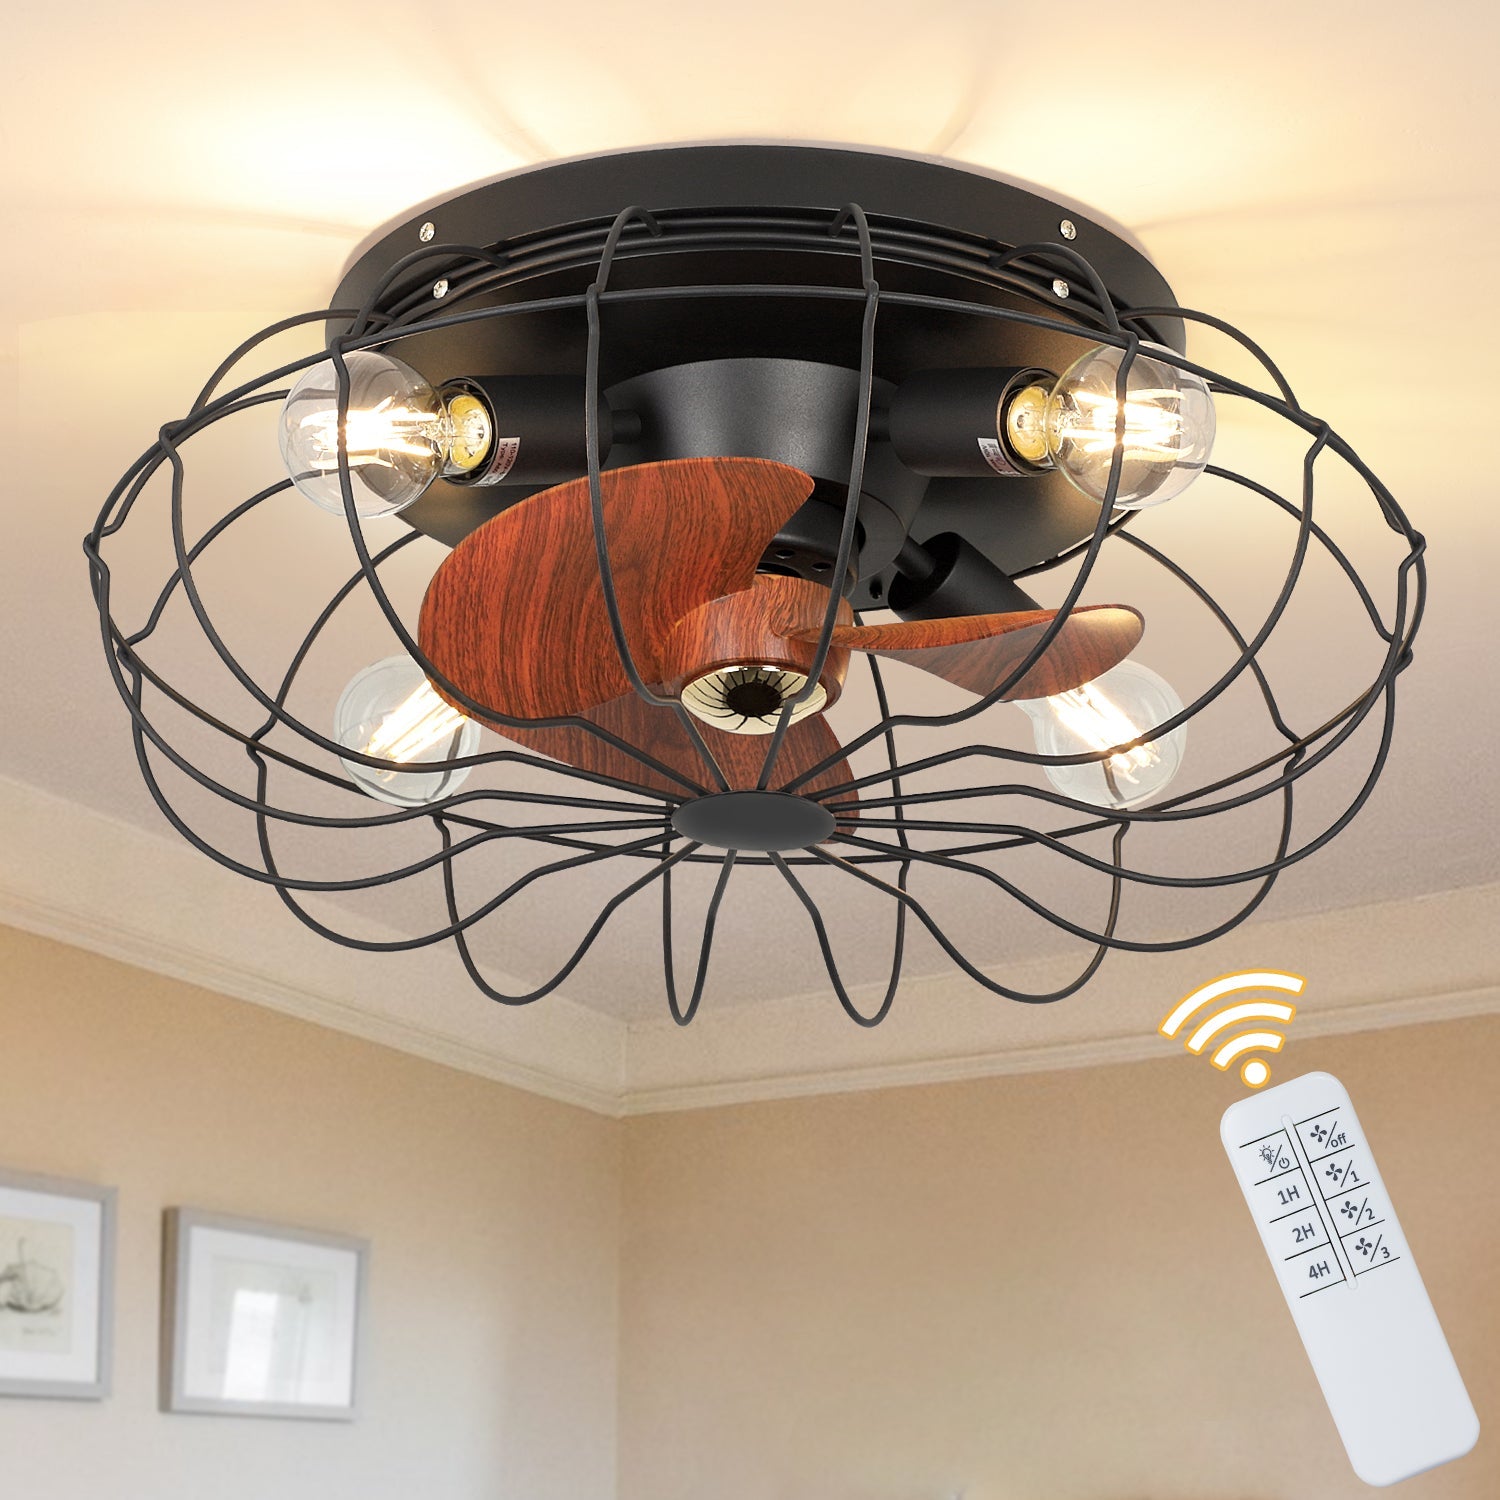 Depuley Caged Design Wooden Thickened Blades Ceiling Fan Lights with Remote, 19.7'' Semi-Enclosed Low Profile Ceiling Fan with 3-Level Wind Speed, Frosted Black Flush Mount Ceiling Fan for kitchen/Bedroom/Living Room/Farmhouse - WS-FPZ28-60B 19 | Depuley